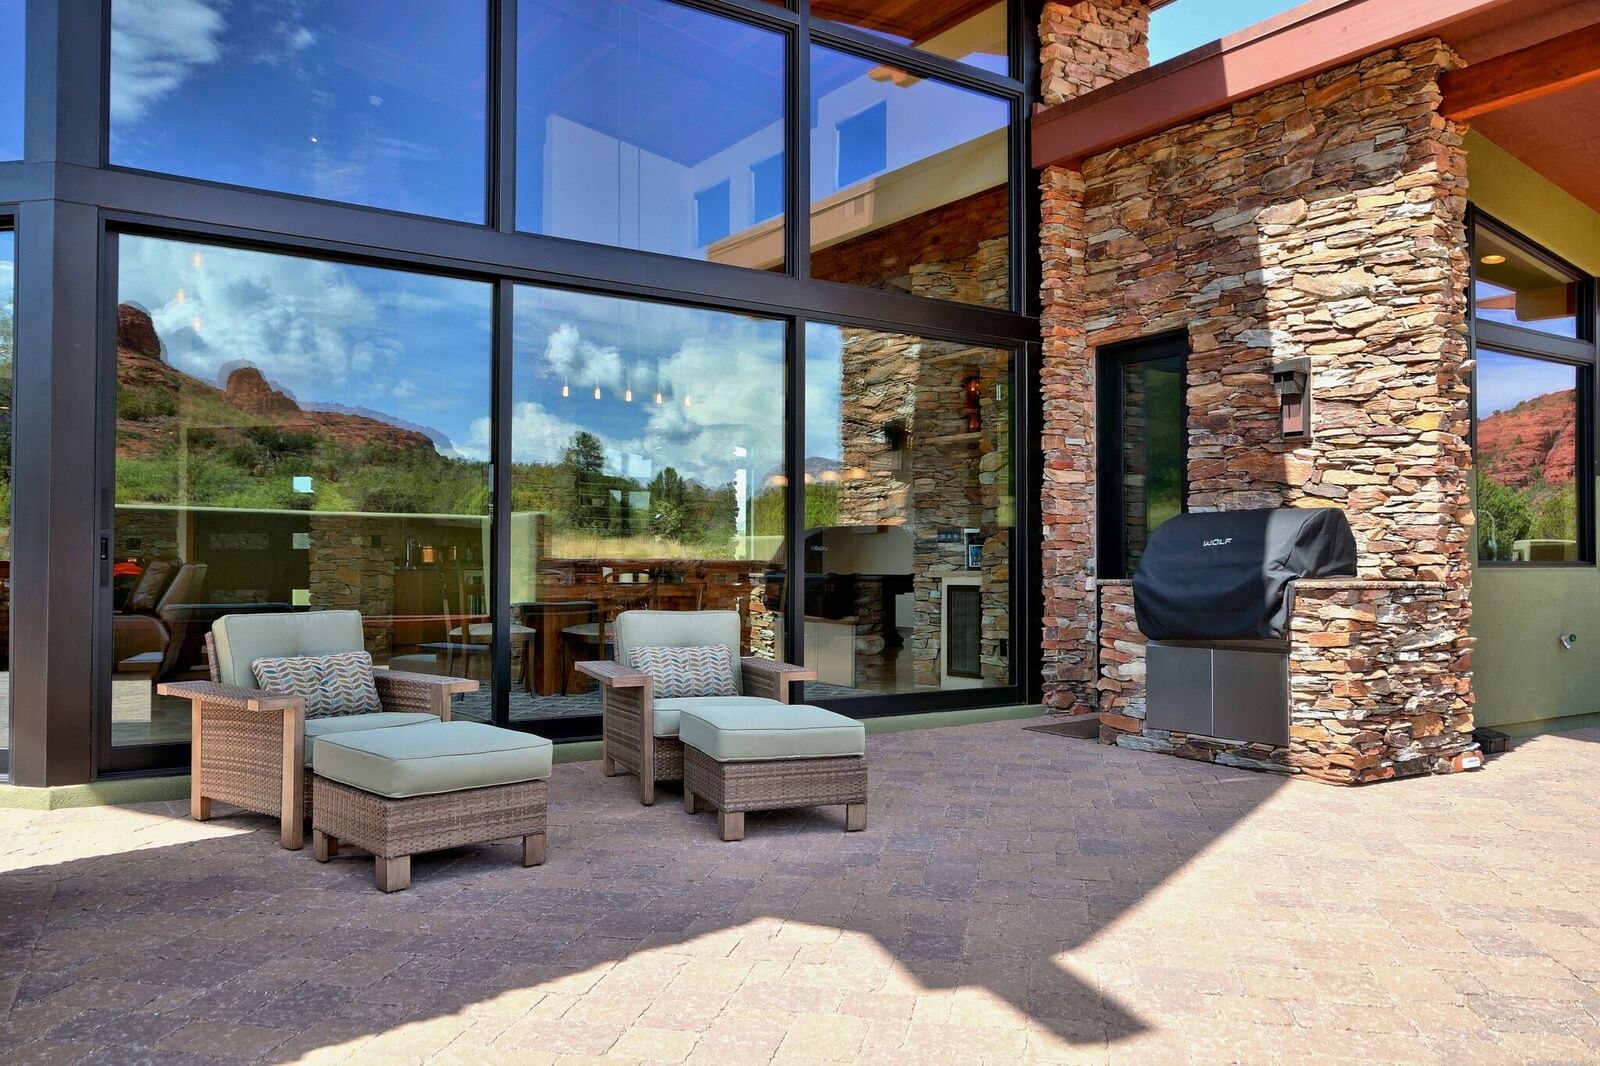 A patio with chairs and a grill in the middle of it.